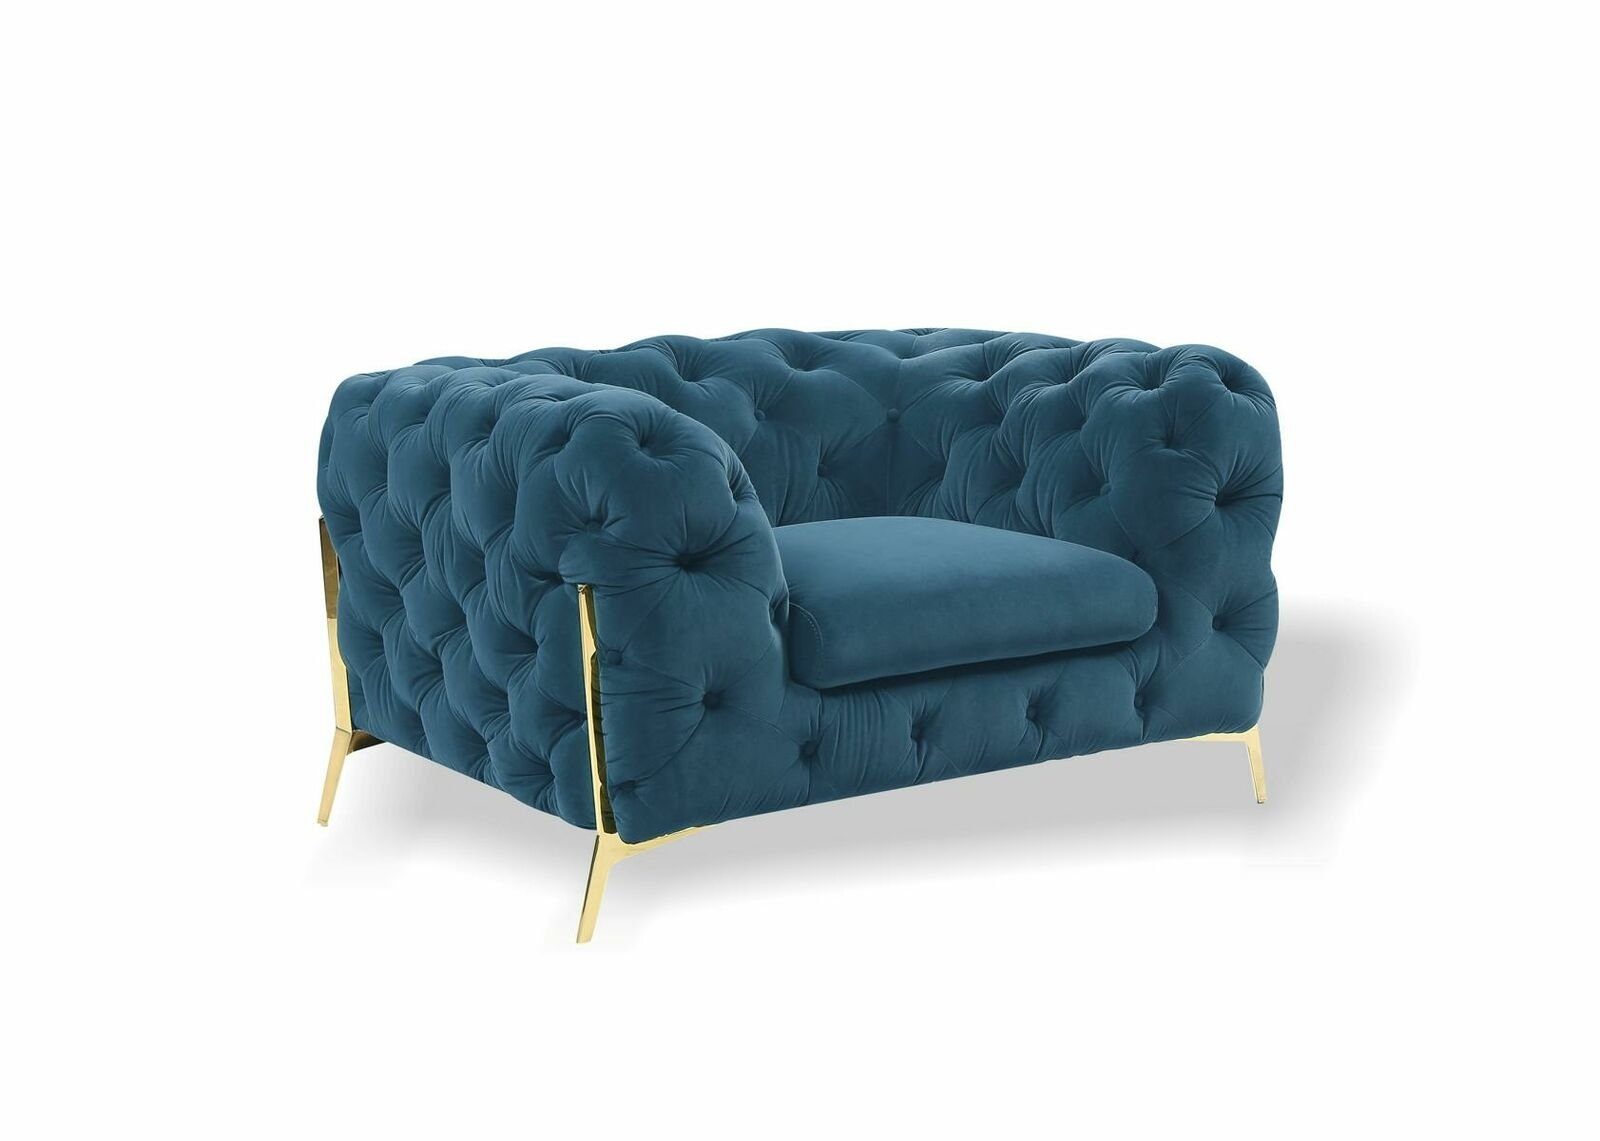 JVmoebel (Sessel), Sessel in Sofa Polster Europe Ohrensessel 1 Ohrensessel Couch Sitzer Blau Chesterfield Made Couch